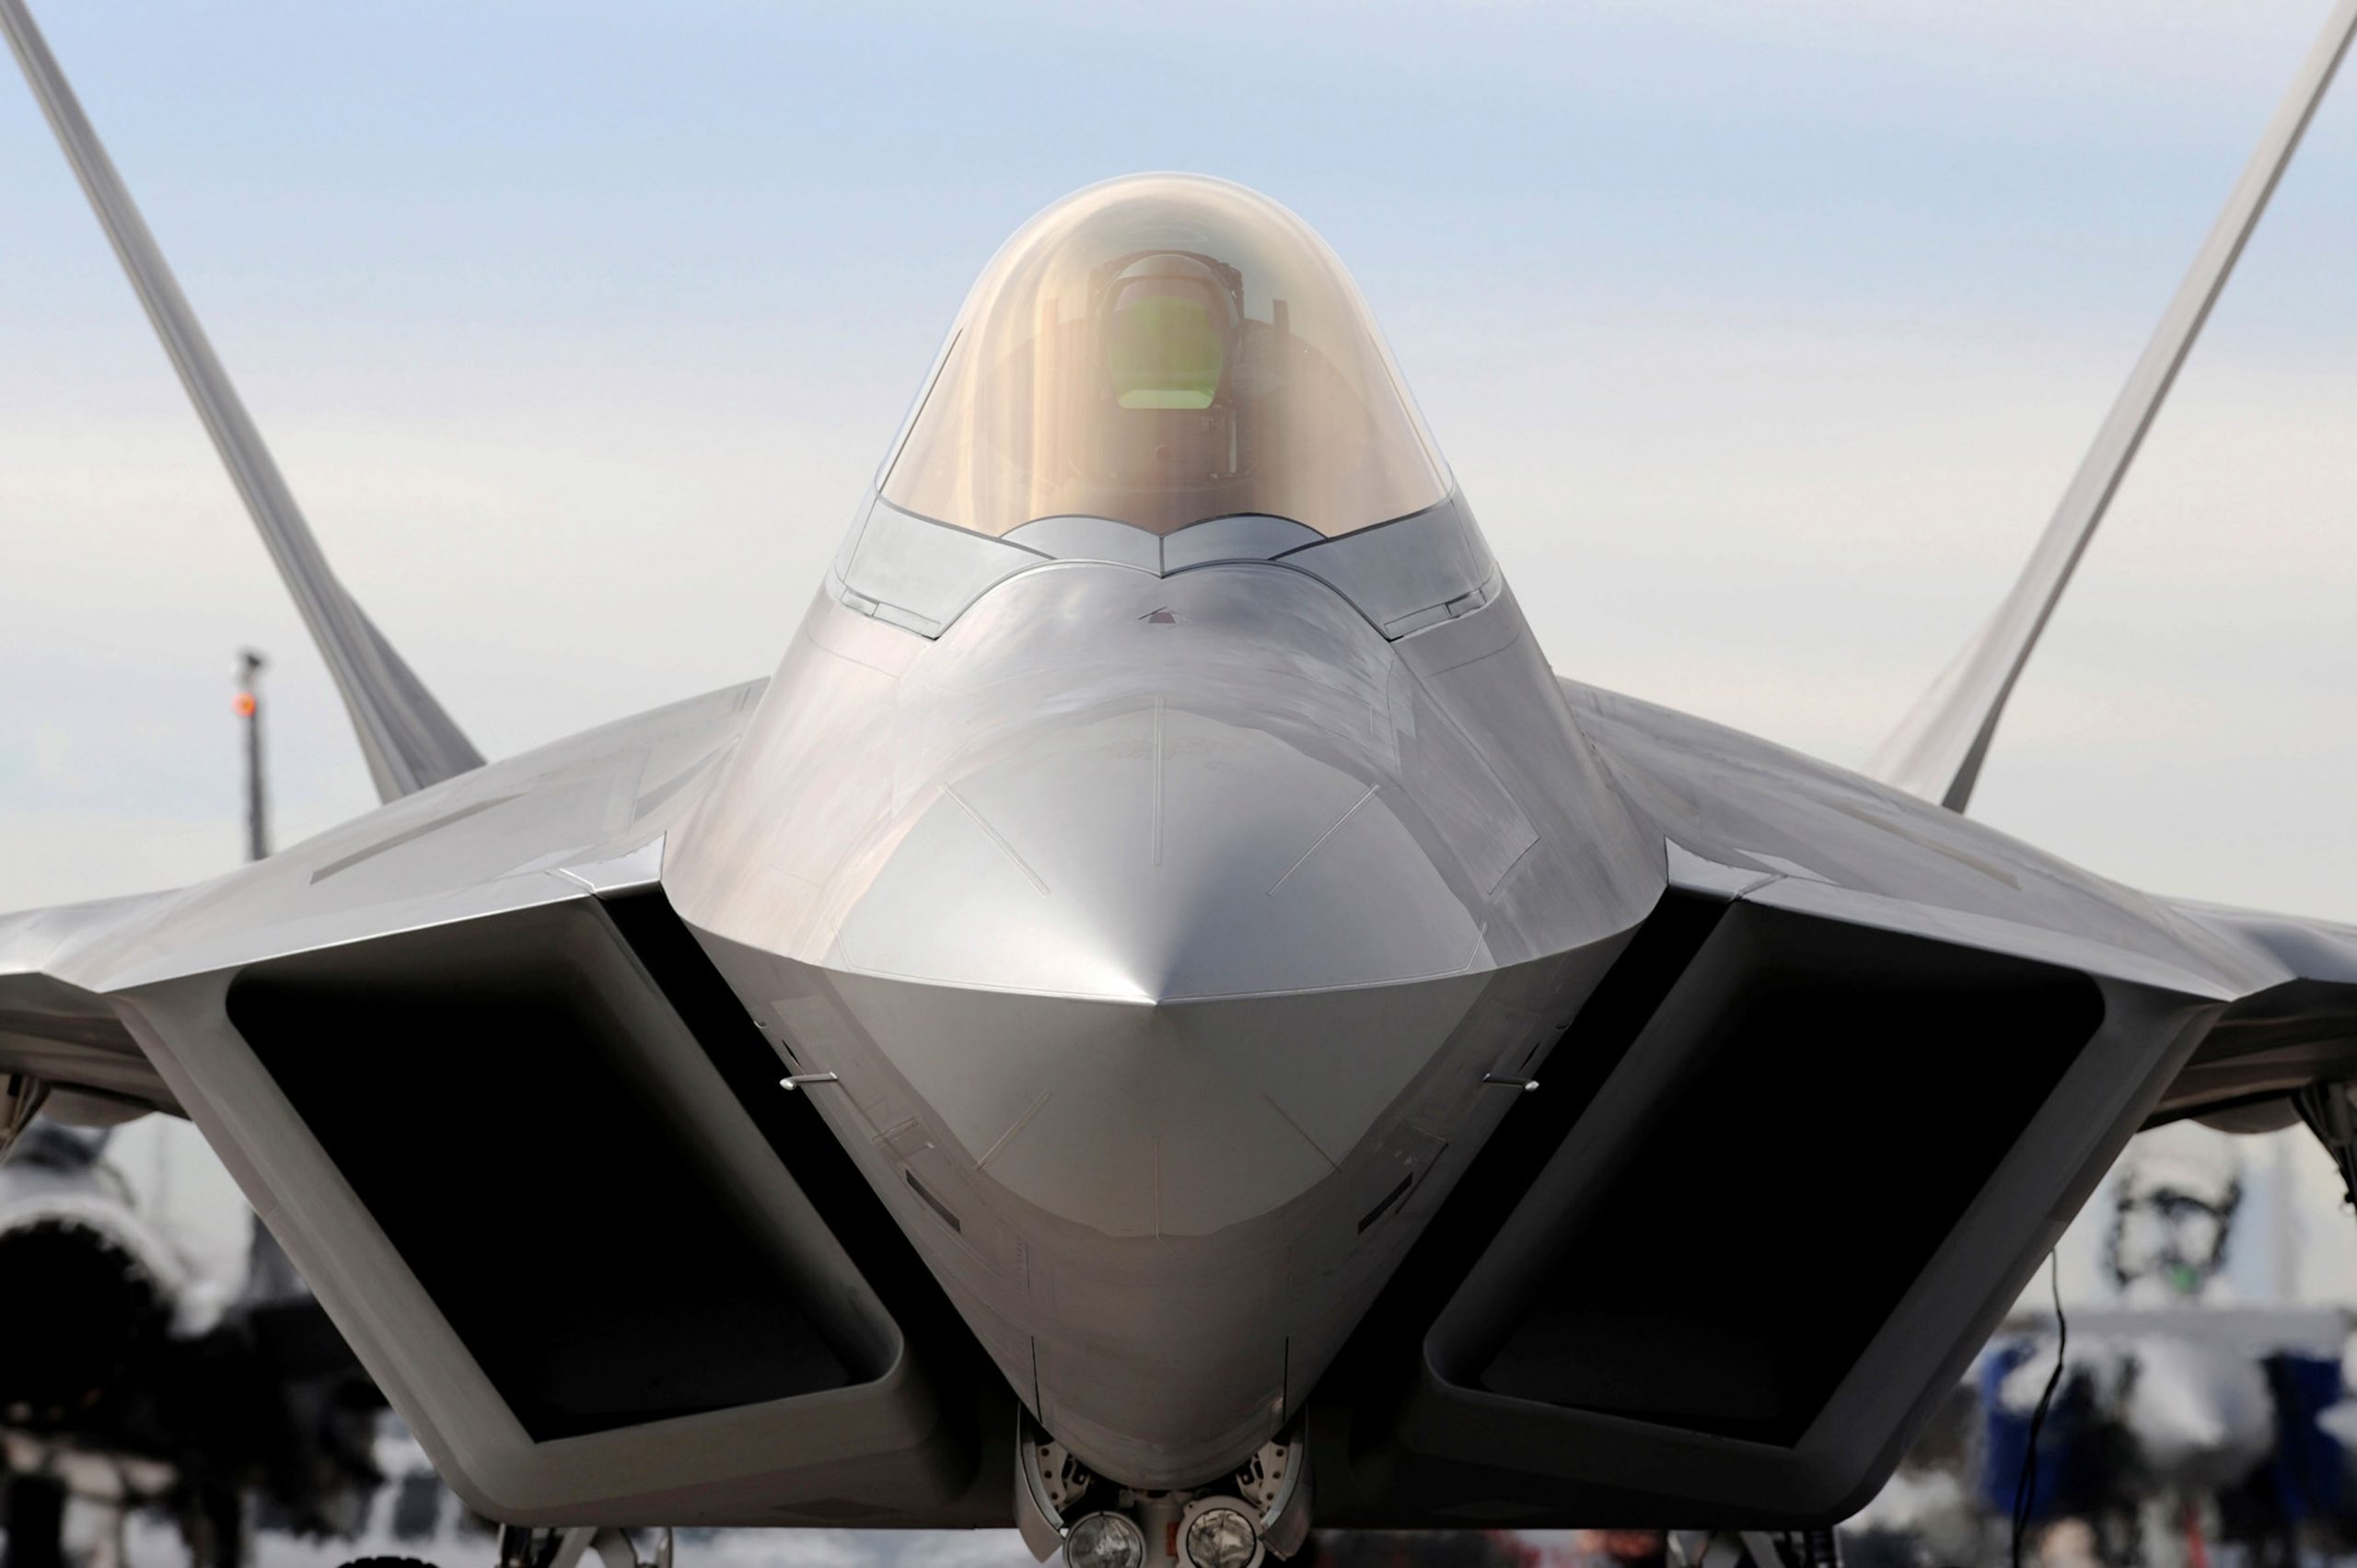 U.S. Air Force Awards Image, Sensor, Radar Data Generator Systems to Aechelon Technology, Inc. for Boeing’s Integration of the F-22 Joint Synthetic Environment (JSE)